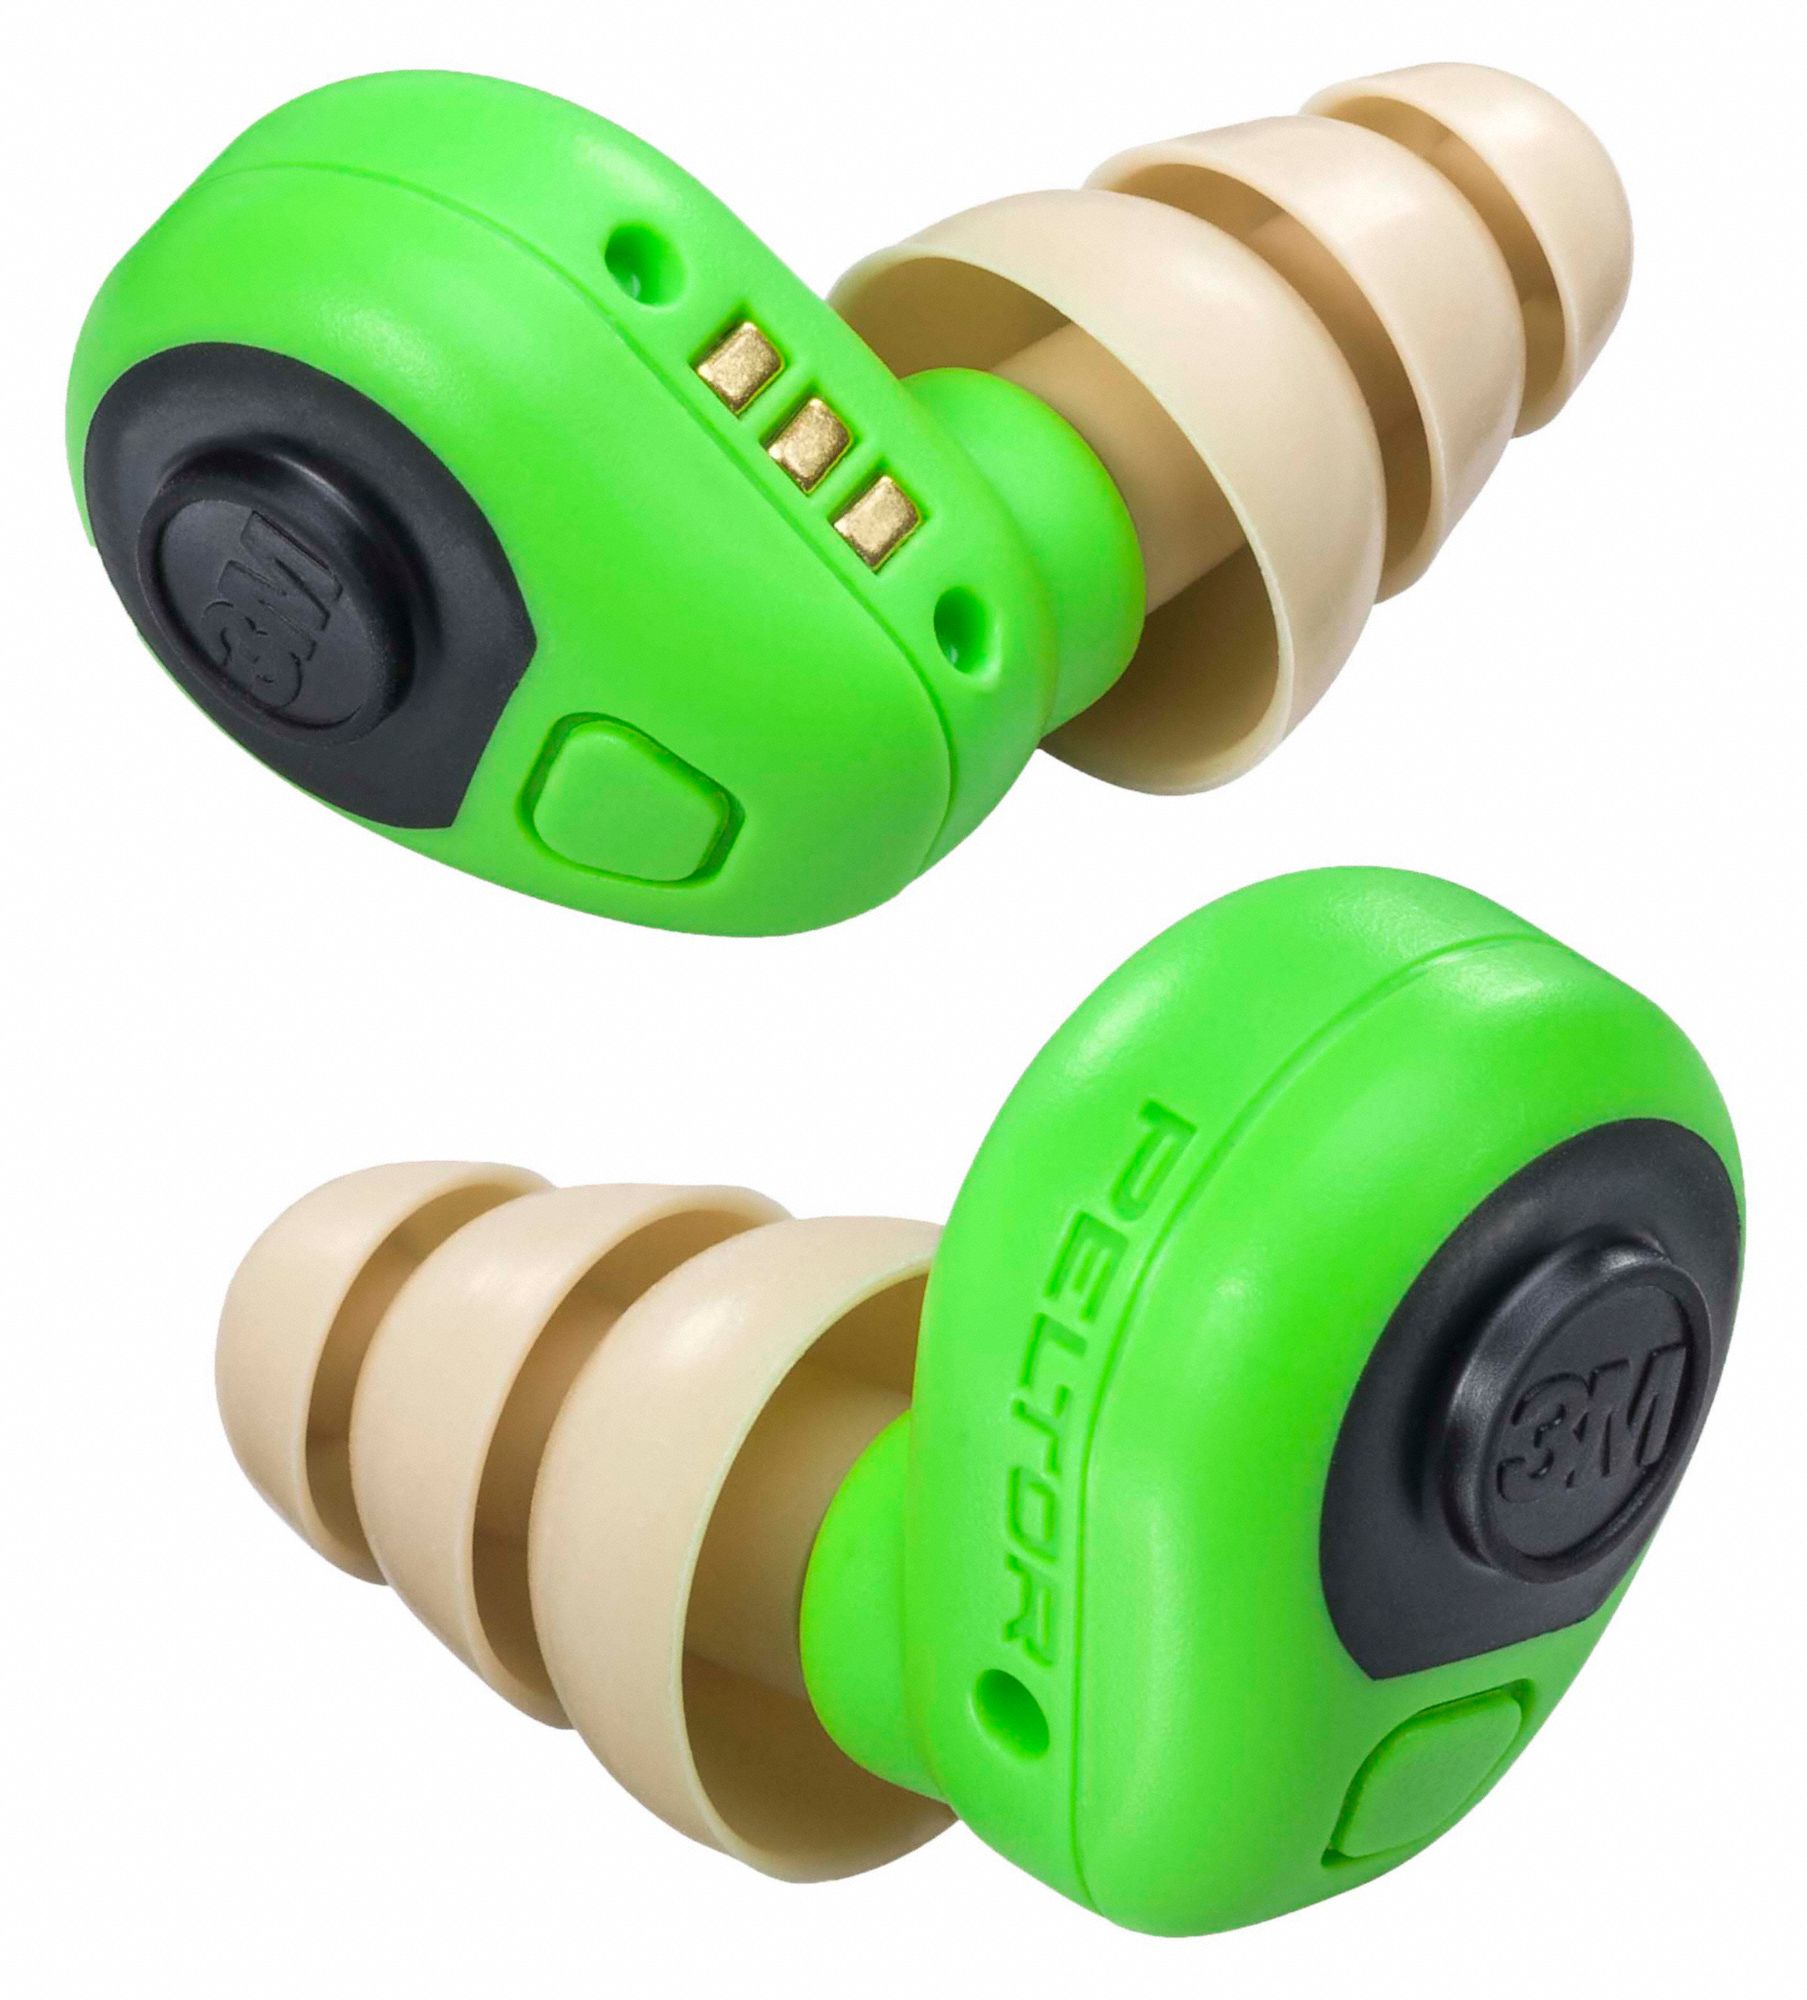 EARPLUG, ELECTRONIC, BUILT-IN IN-EAR, OVER-THE-HEAD/NRR 23DB, GREEN, LITHIUM BATTERY